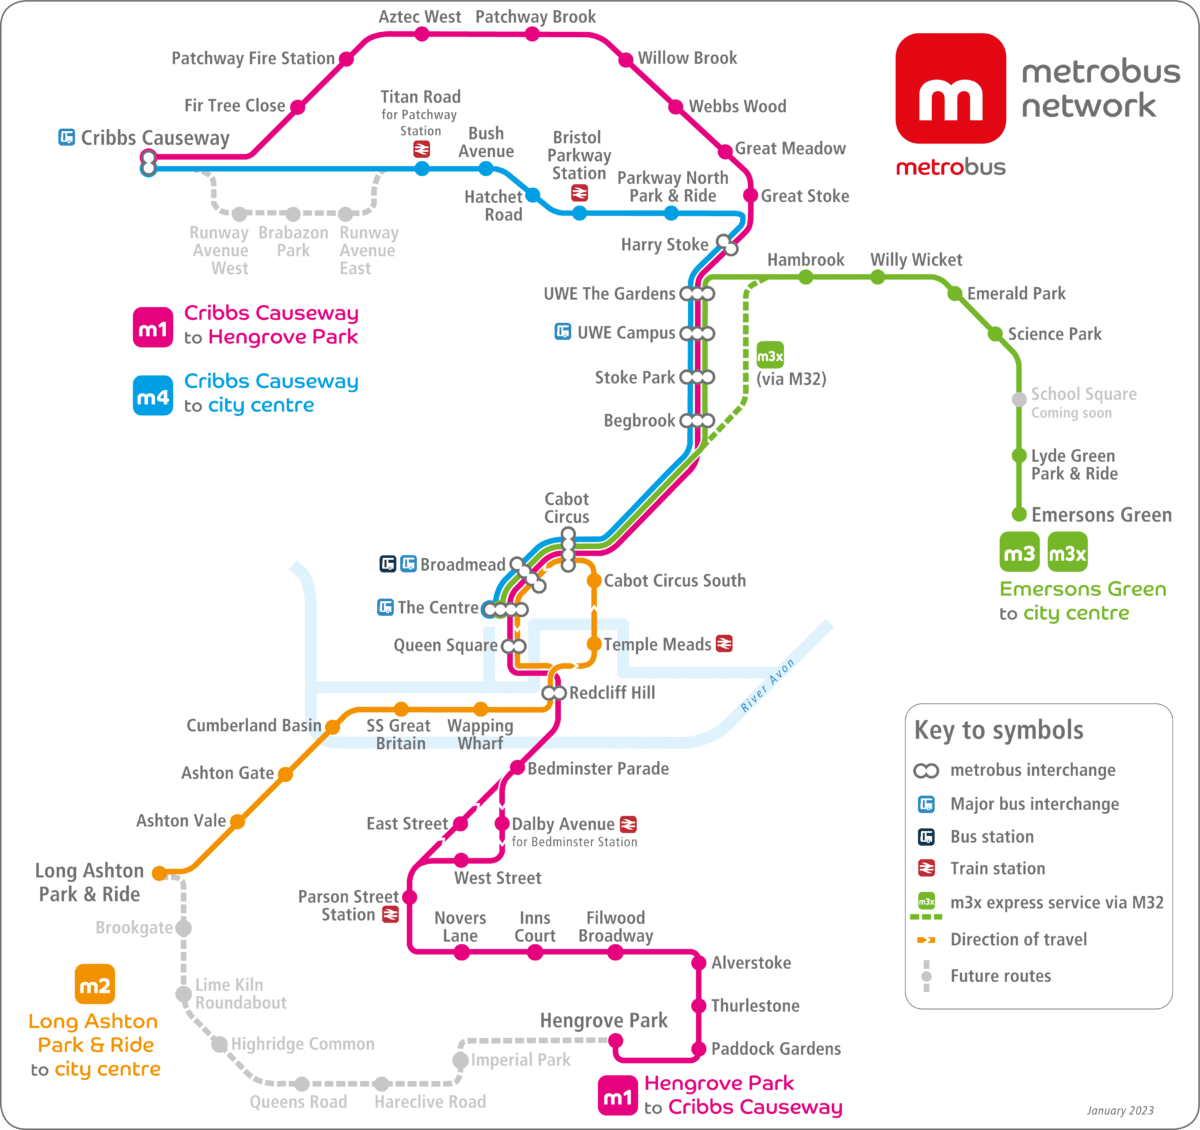 metrobus diagram showing all services.